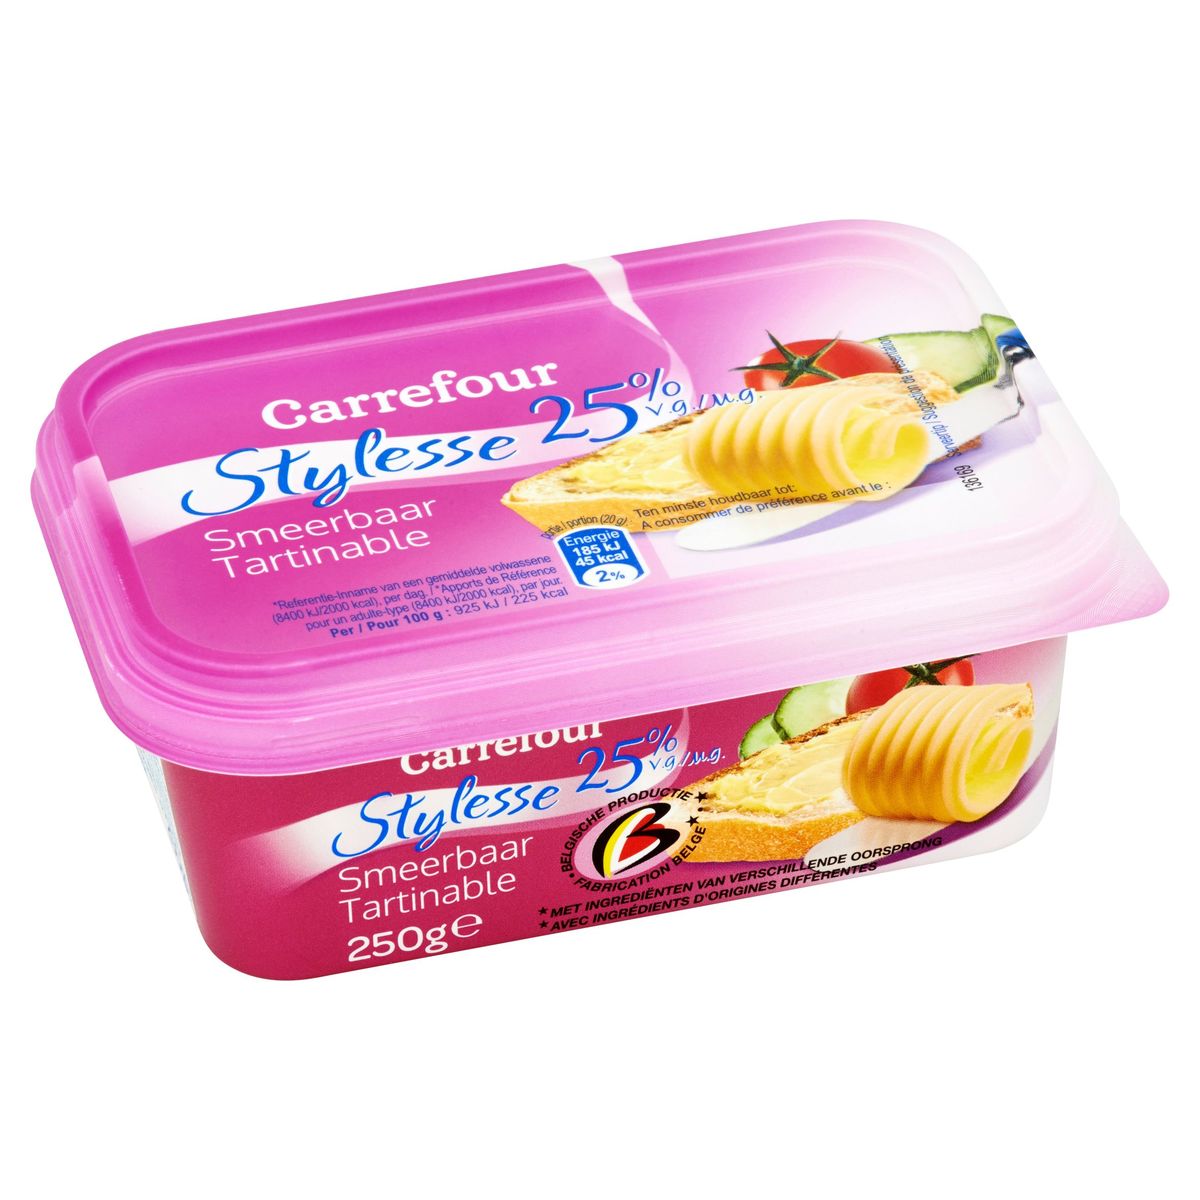 Carrefour Stylesse 25% M.G. Tartinable 250 g